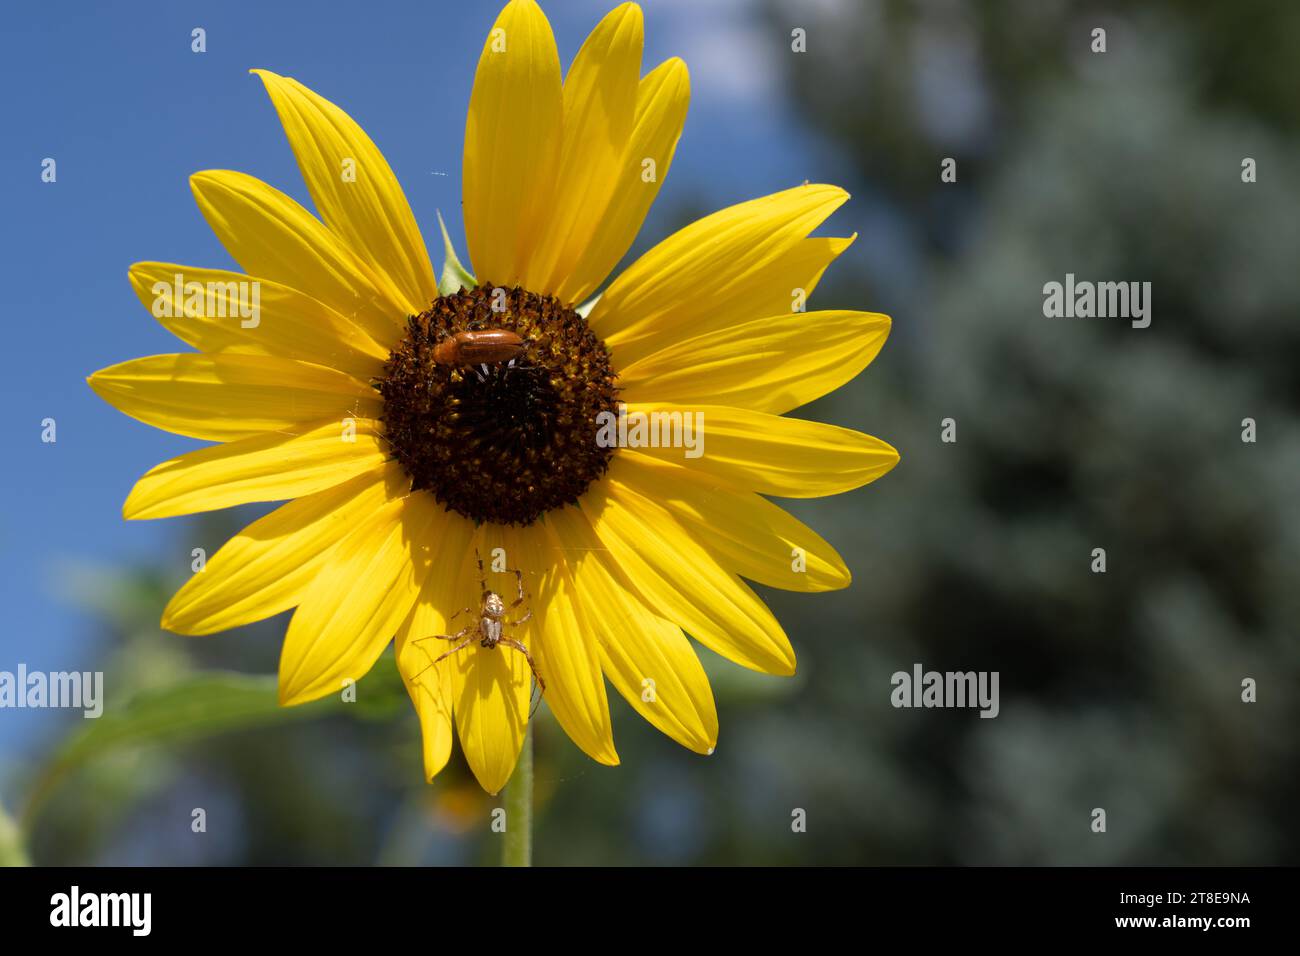 A Western Spotted Orbweaver, Neoscona oaxacensis, and a blister beetle on a Common Sunflower in Utah. Stock Photo